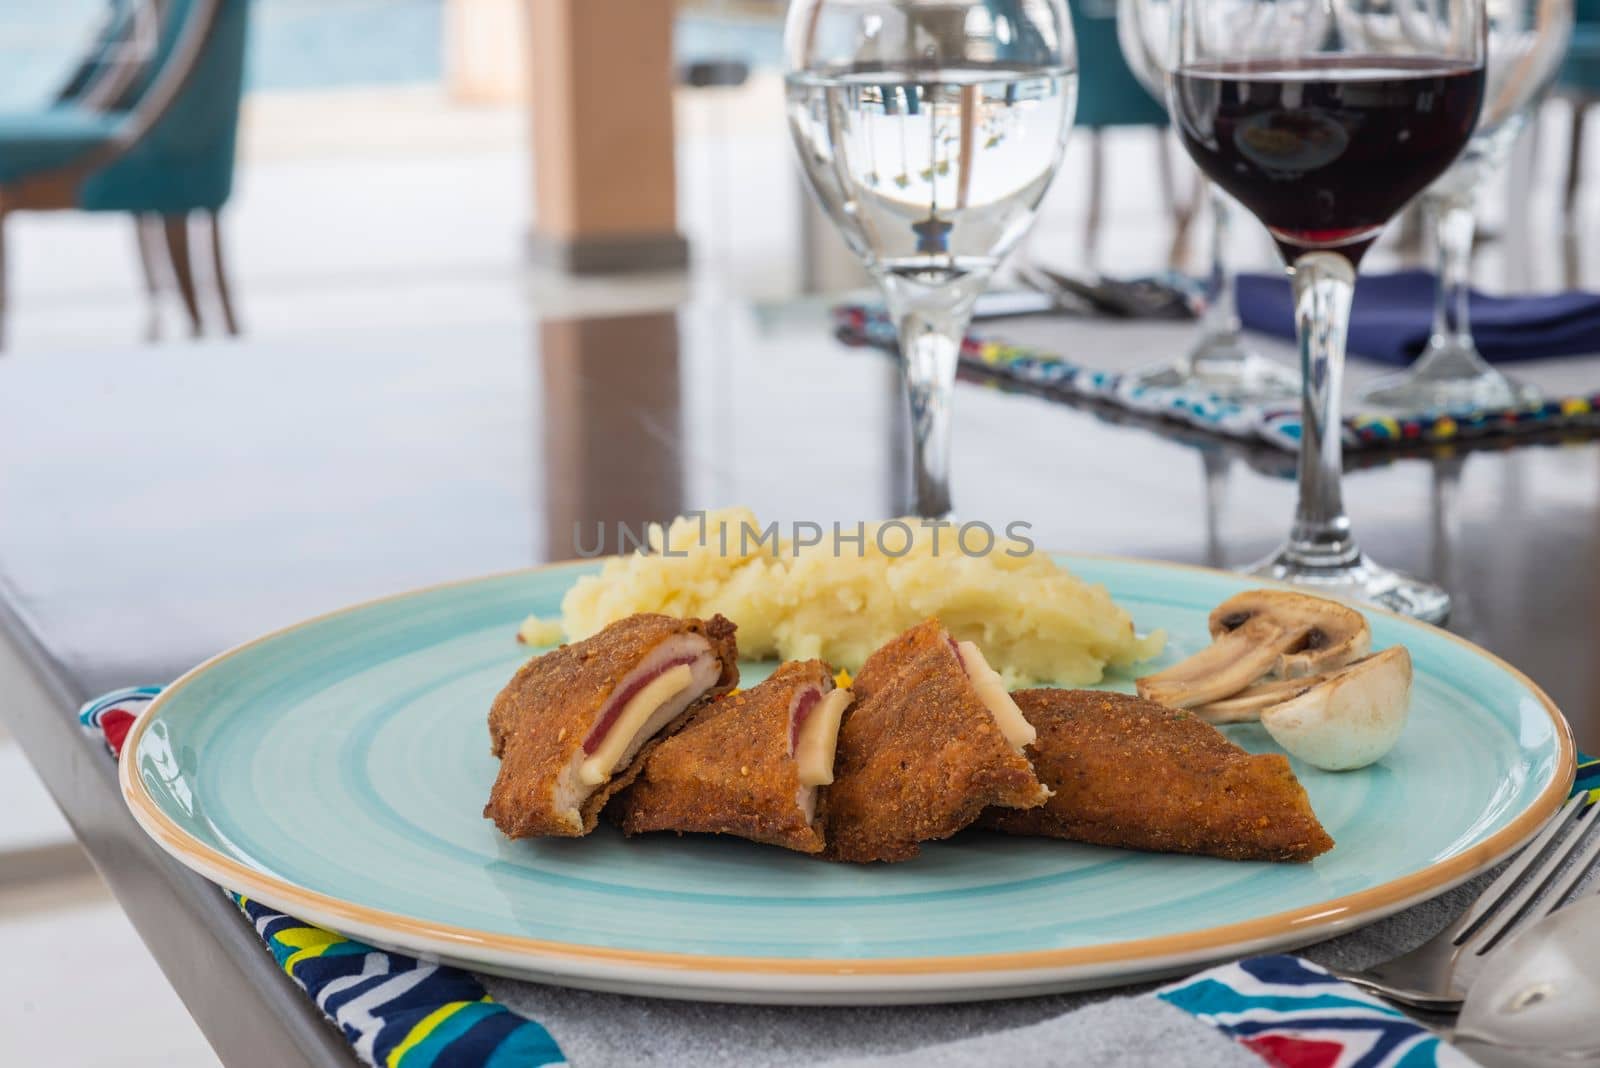 Stuffed chicken panne a la carte meal with mashed potato by paulvinten